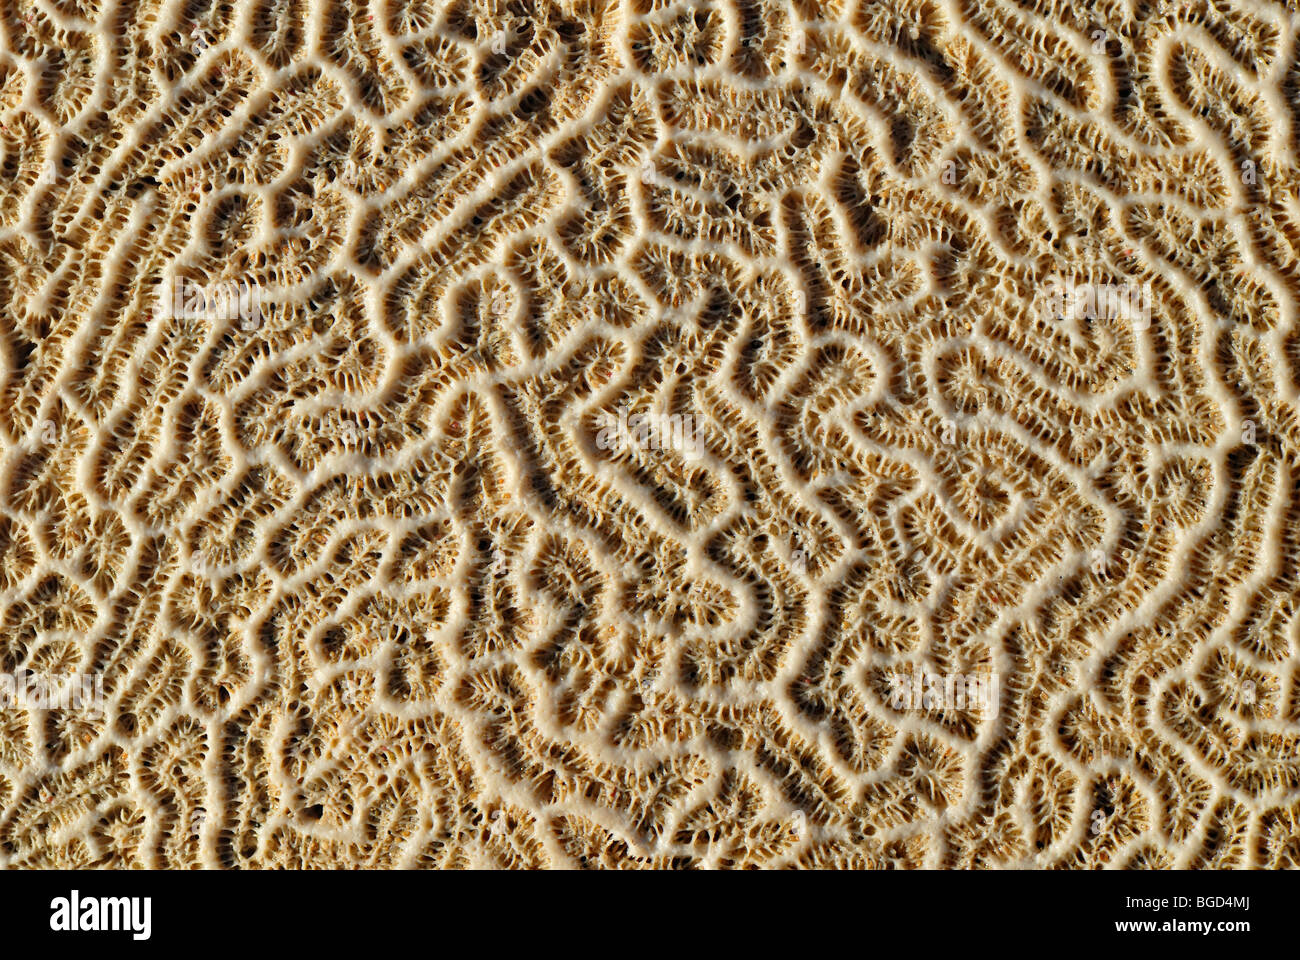 Structure of a brain coral (Diploria strigosa), washed up on the beach, St. Croix island, U.S. Virgin Islands, United States Stock Photo